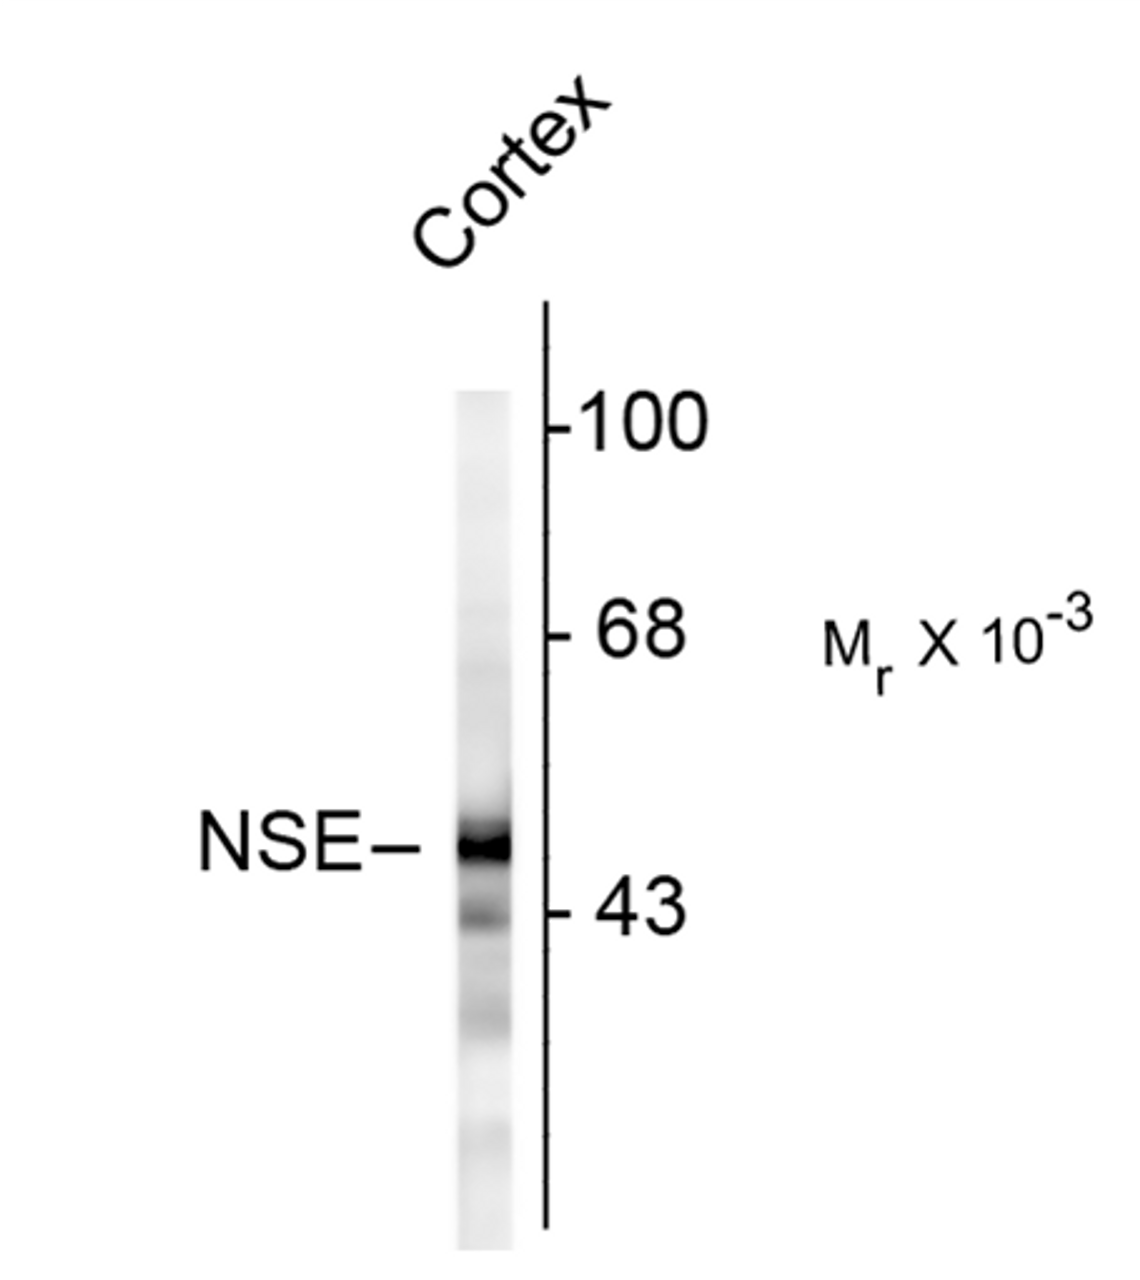 Western blot of rat cortex homogenate showing specific immunolabeling of the ~47k NSE protein.